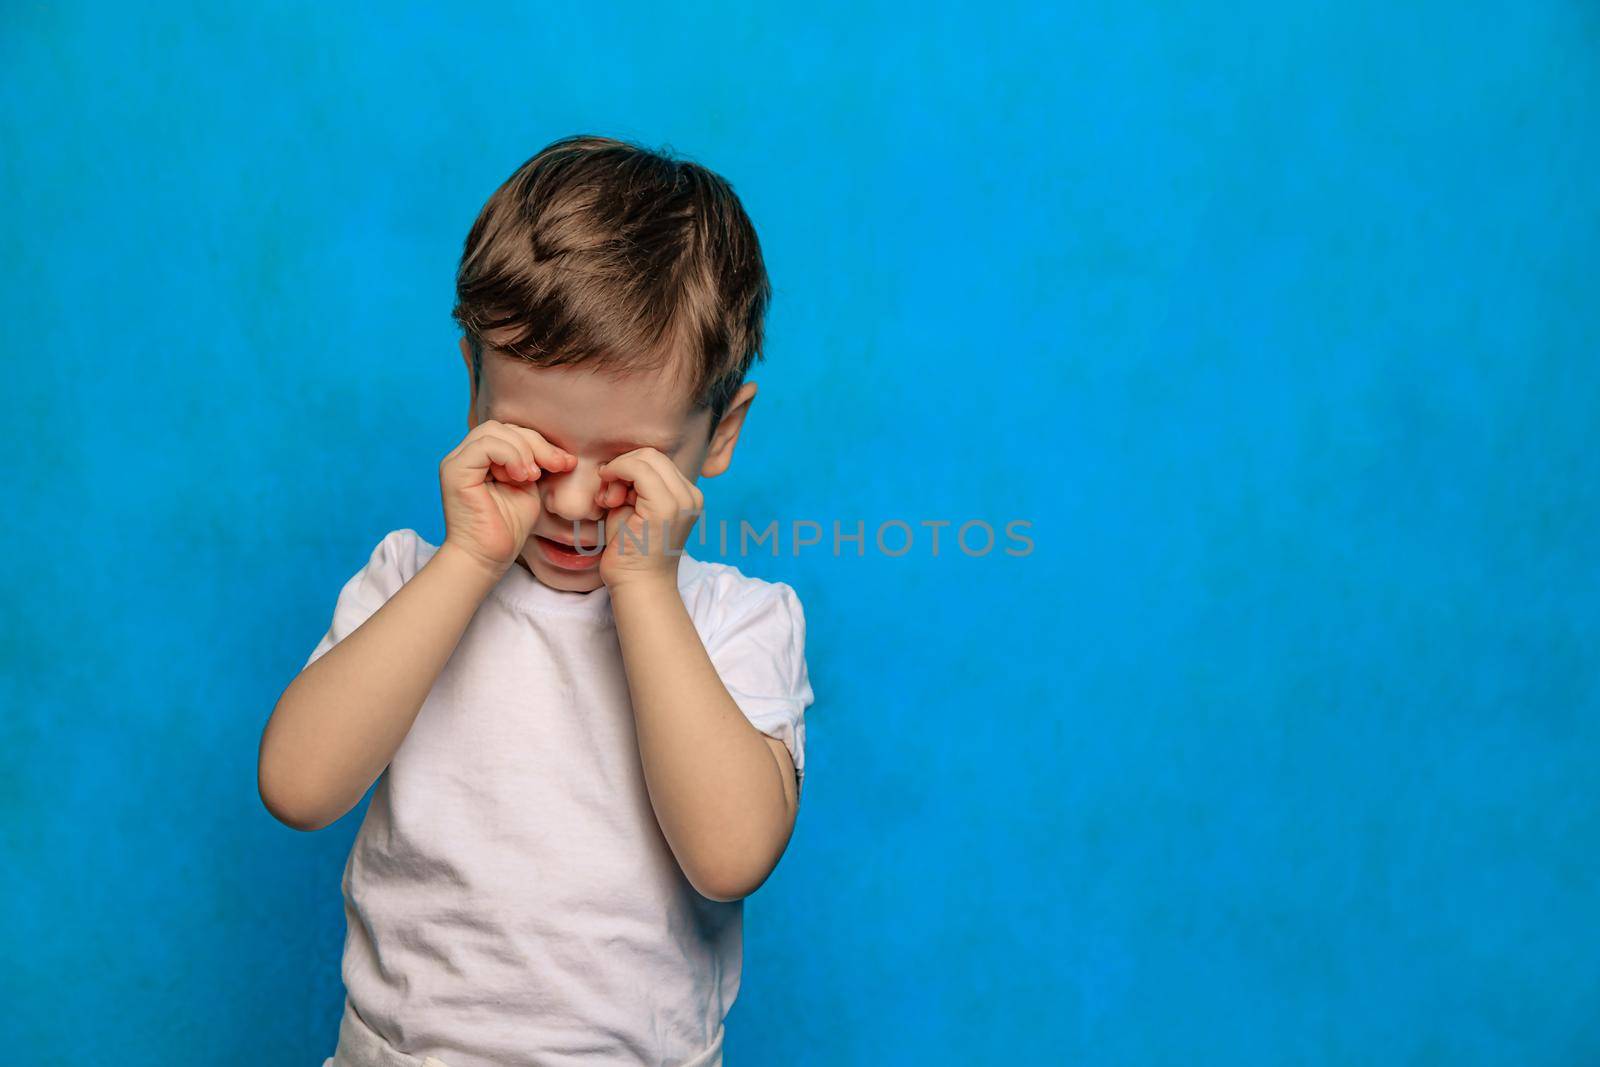 A boy on a blue background rubs his eyes . Eye health. Eye diseases. A crying baby. Fatigue of children. Psychology. Copy Space